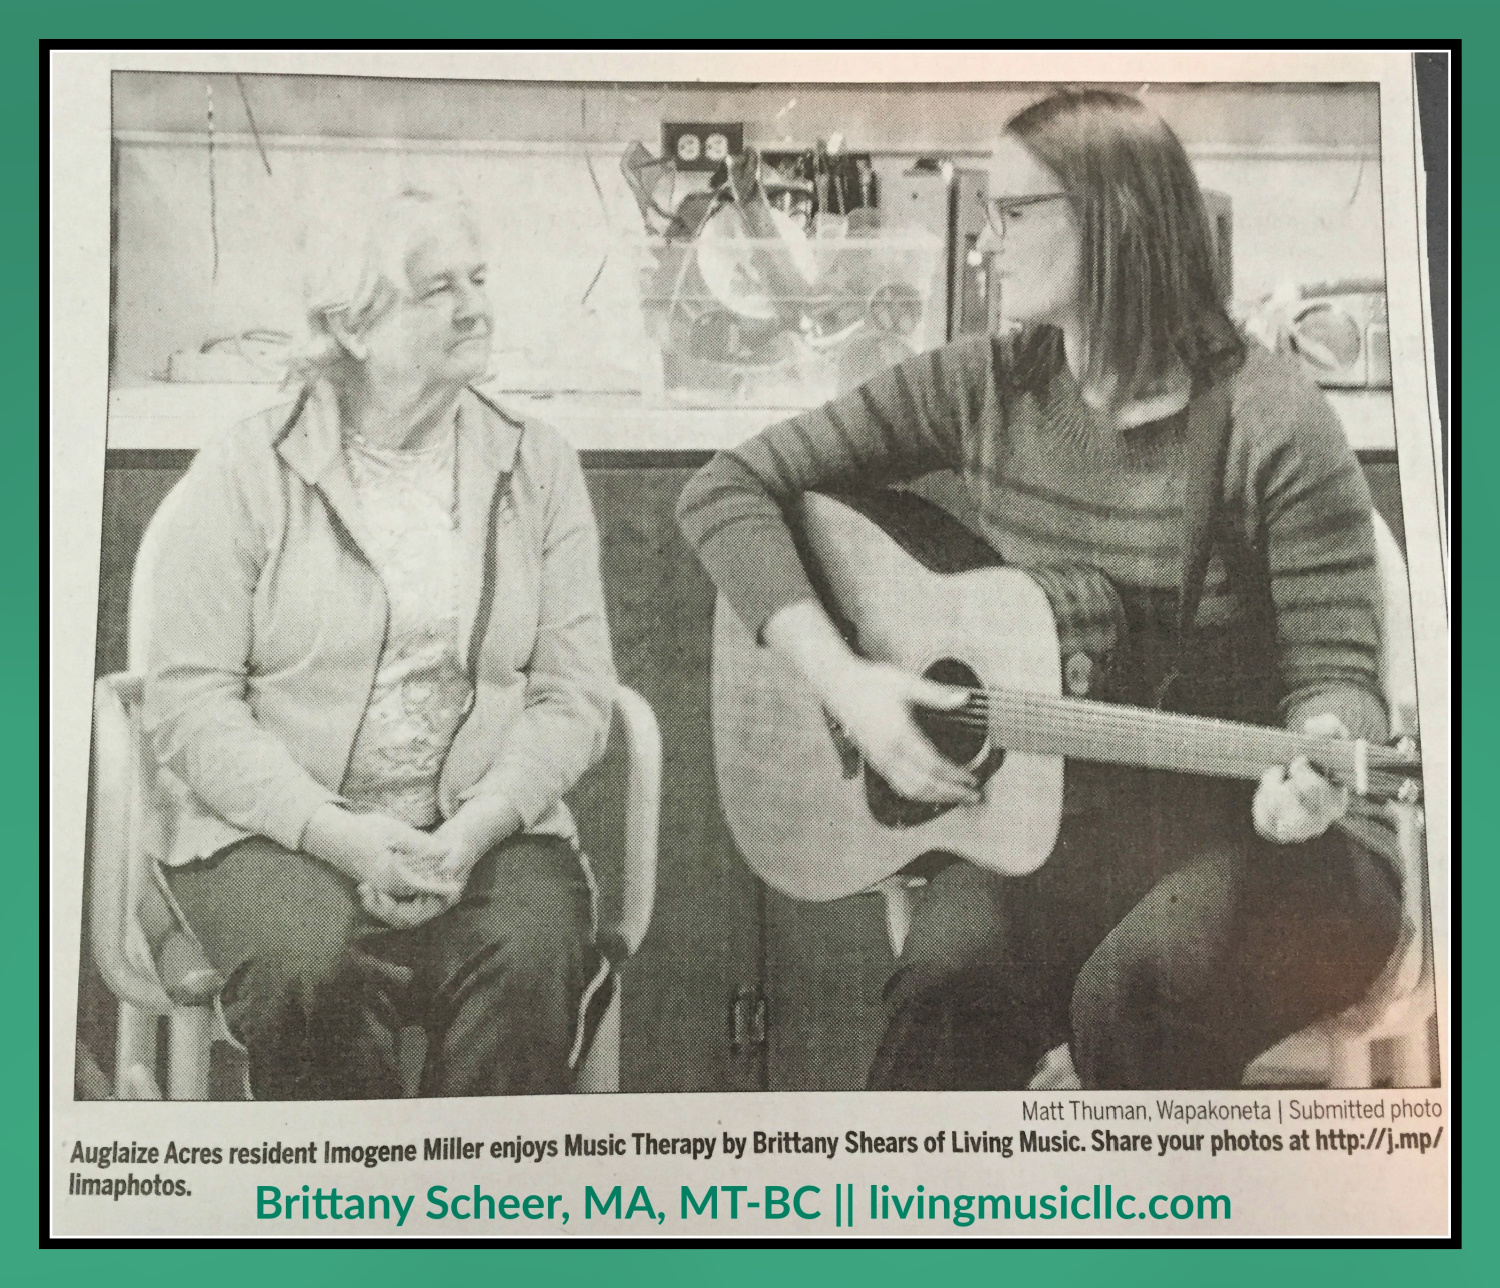 A black and white physical newsletter clip featuring Brittany Scheer of Living Music along with an Auglaize Acres resident.